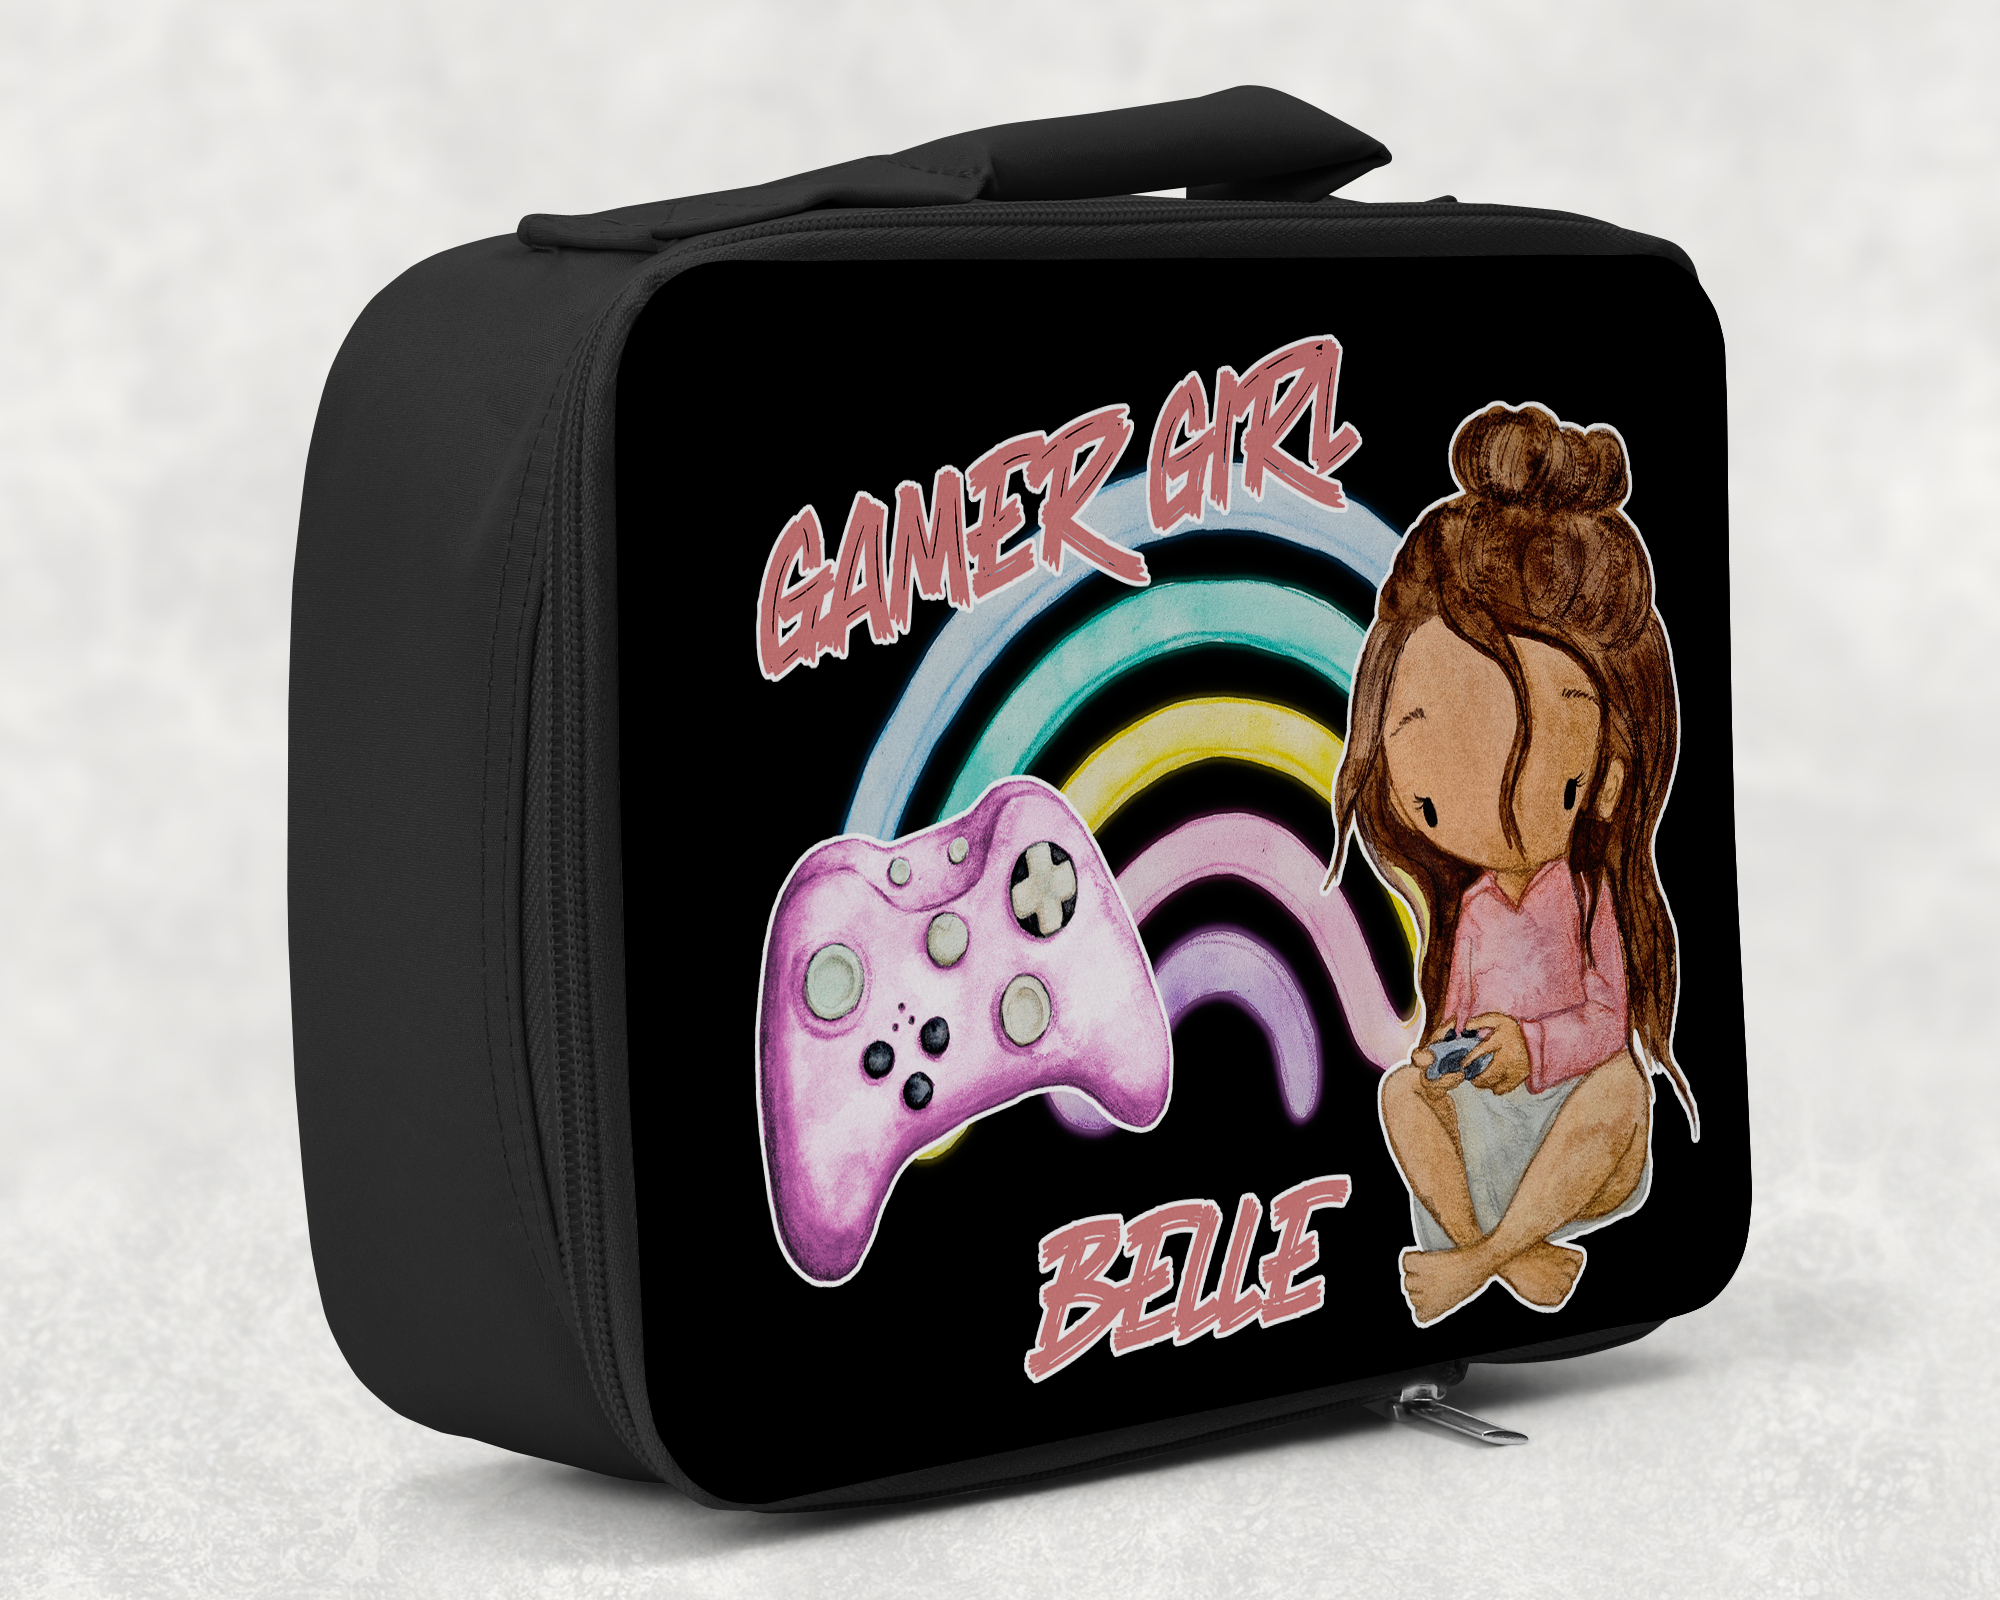 children's insulated lunch bag with bright colourful personalised printed design in gamer girl theme